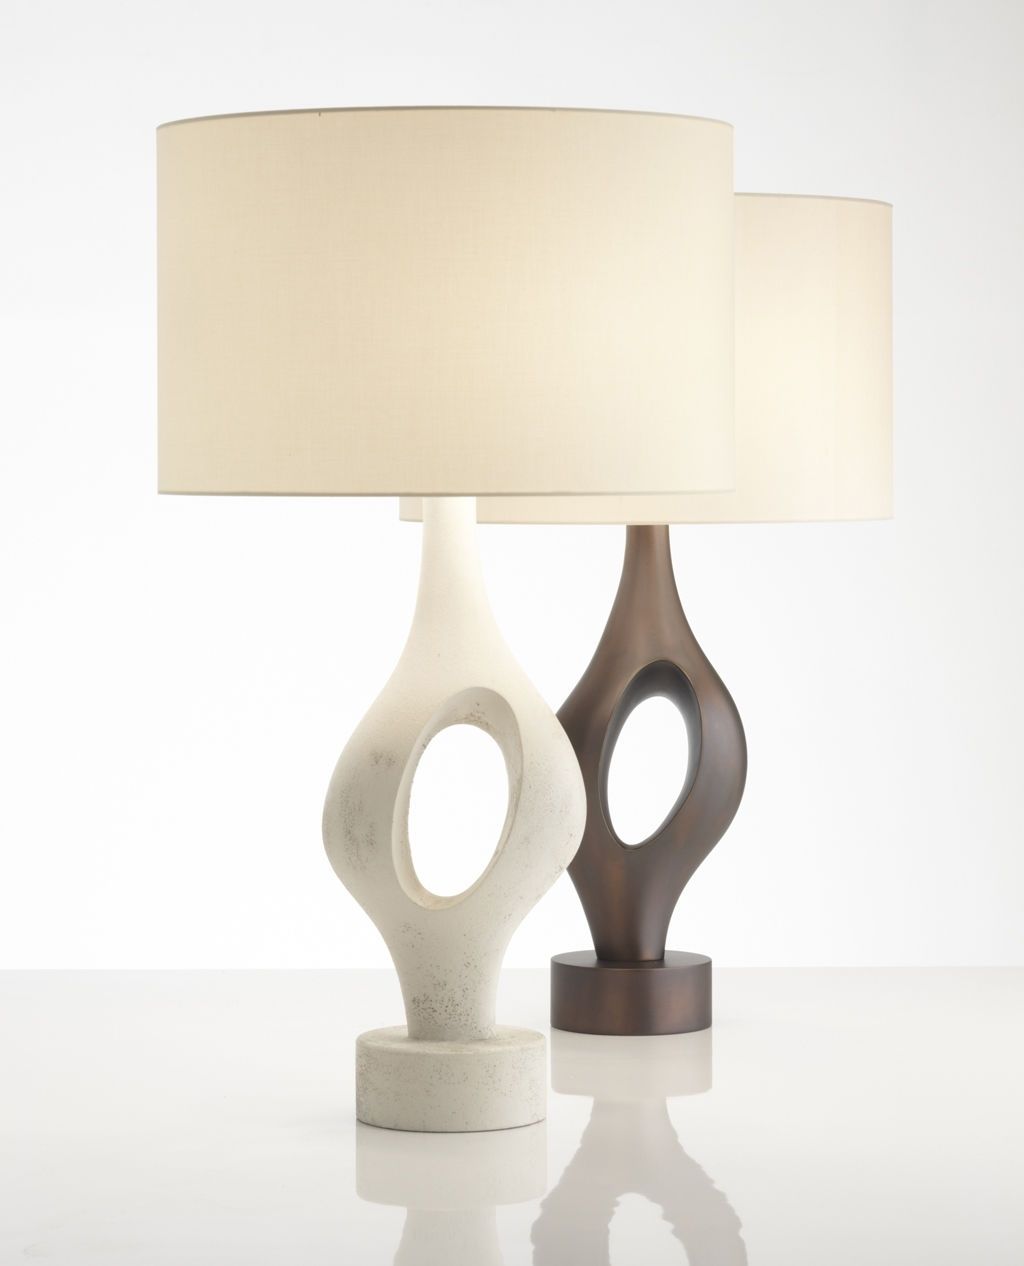 Fascinating Unique Table Lamps For Living Room Your Home Decor – Tikspor Intended For Unique Table Lamps Living Room (View 8 of 15)